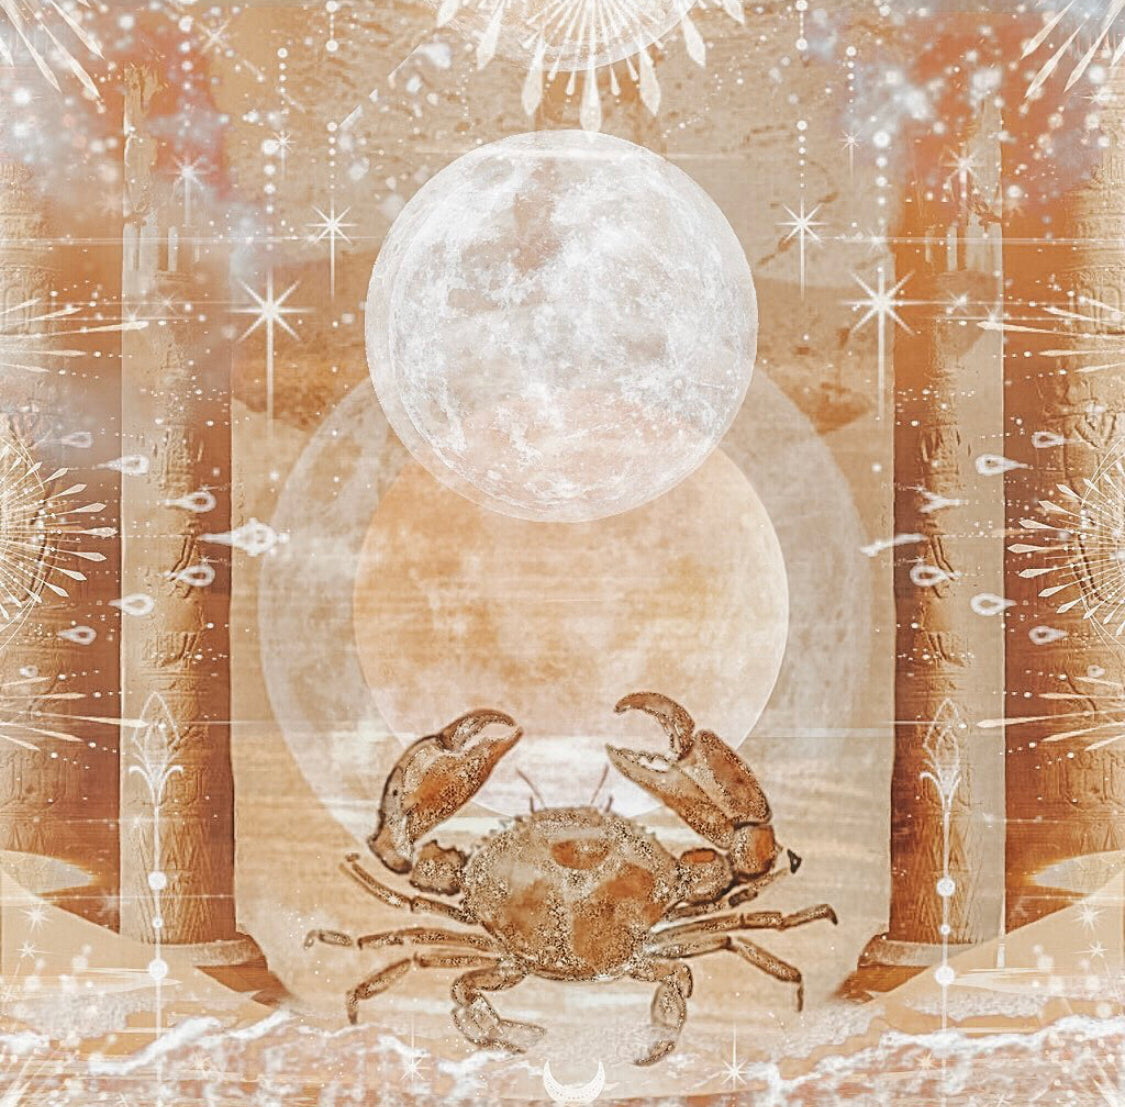 Moon Musings: How The Full Moon in Cancer Will Affect Your Zodiac Sign (Dec. 29, 2020)